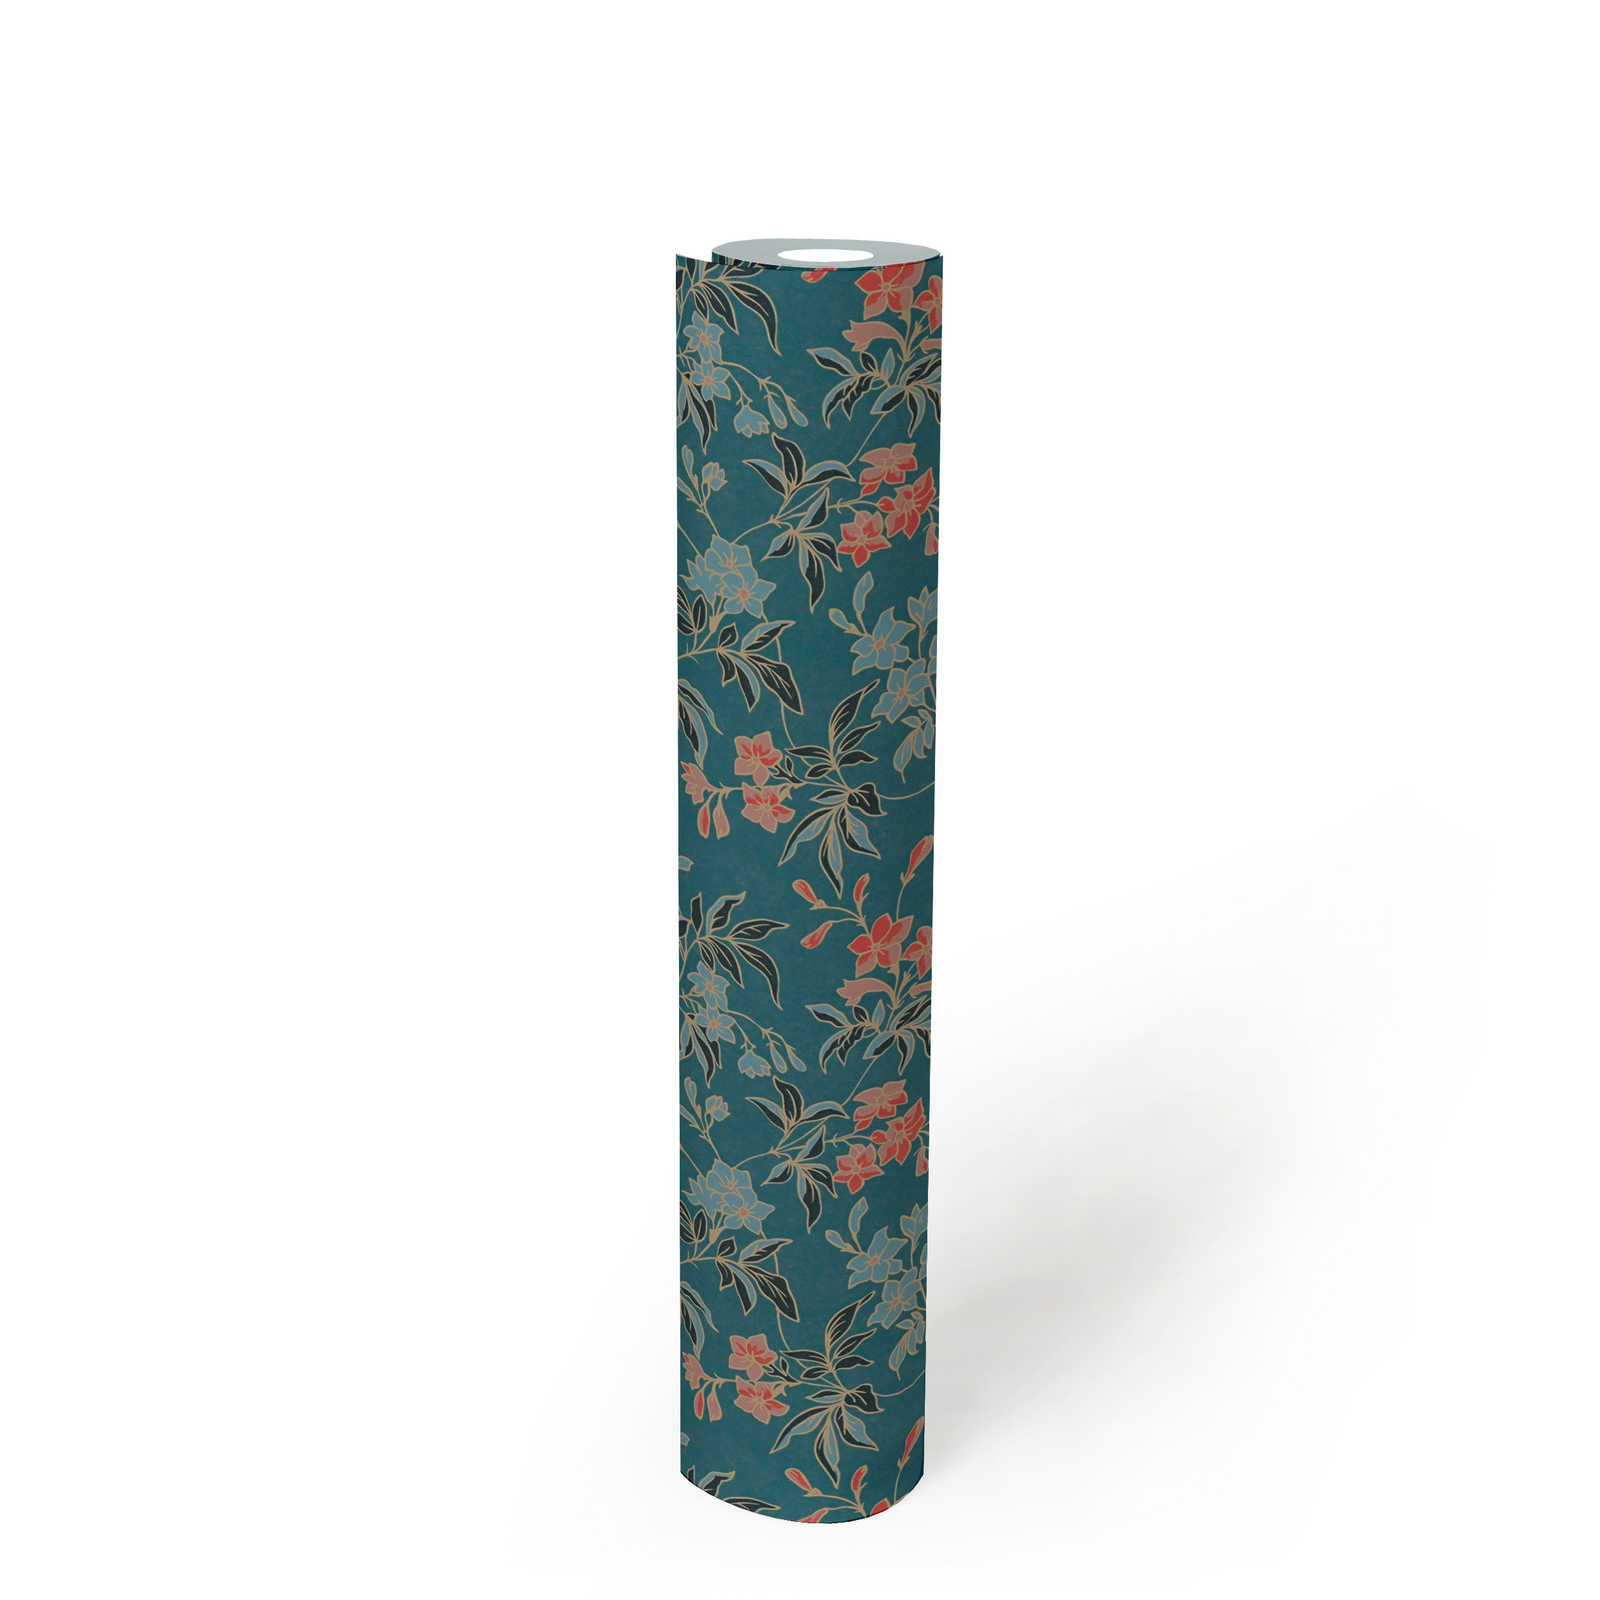             Flower tendrils non-woven wallpaper in English style - blue, red, yellow
        